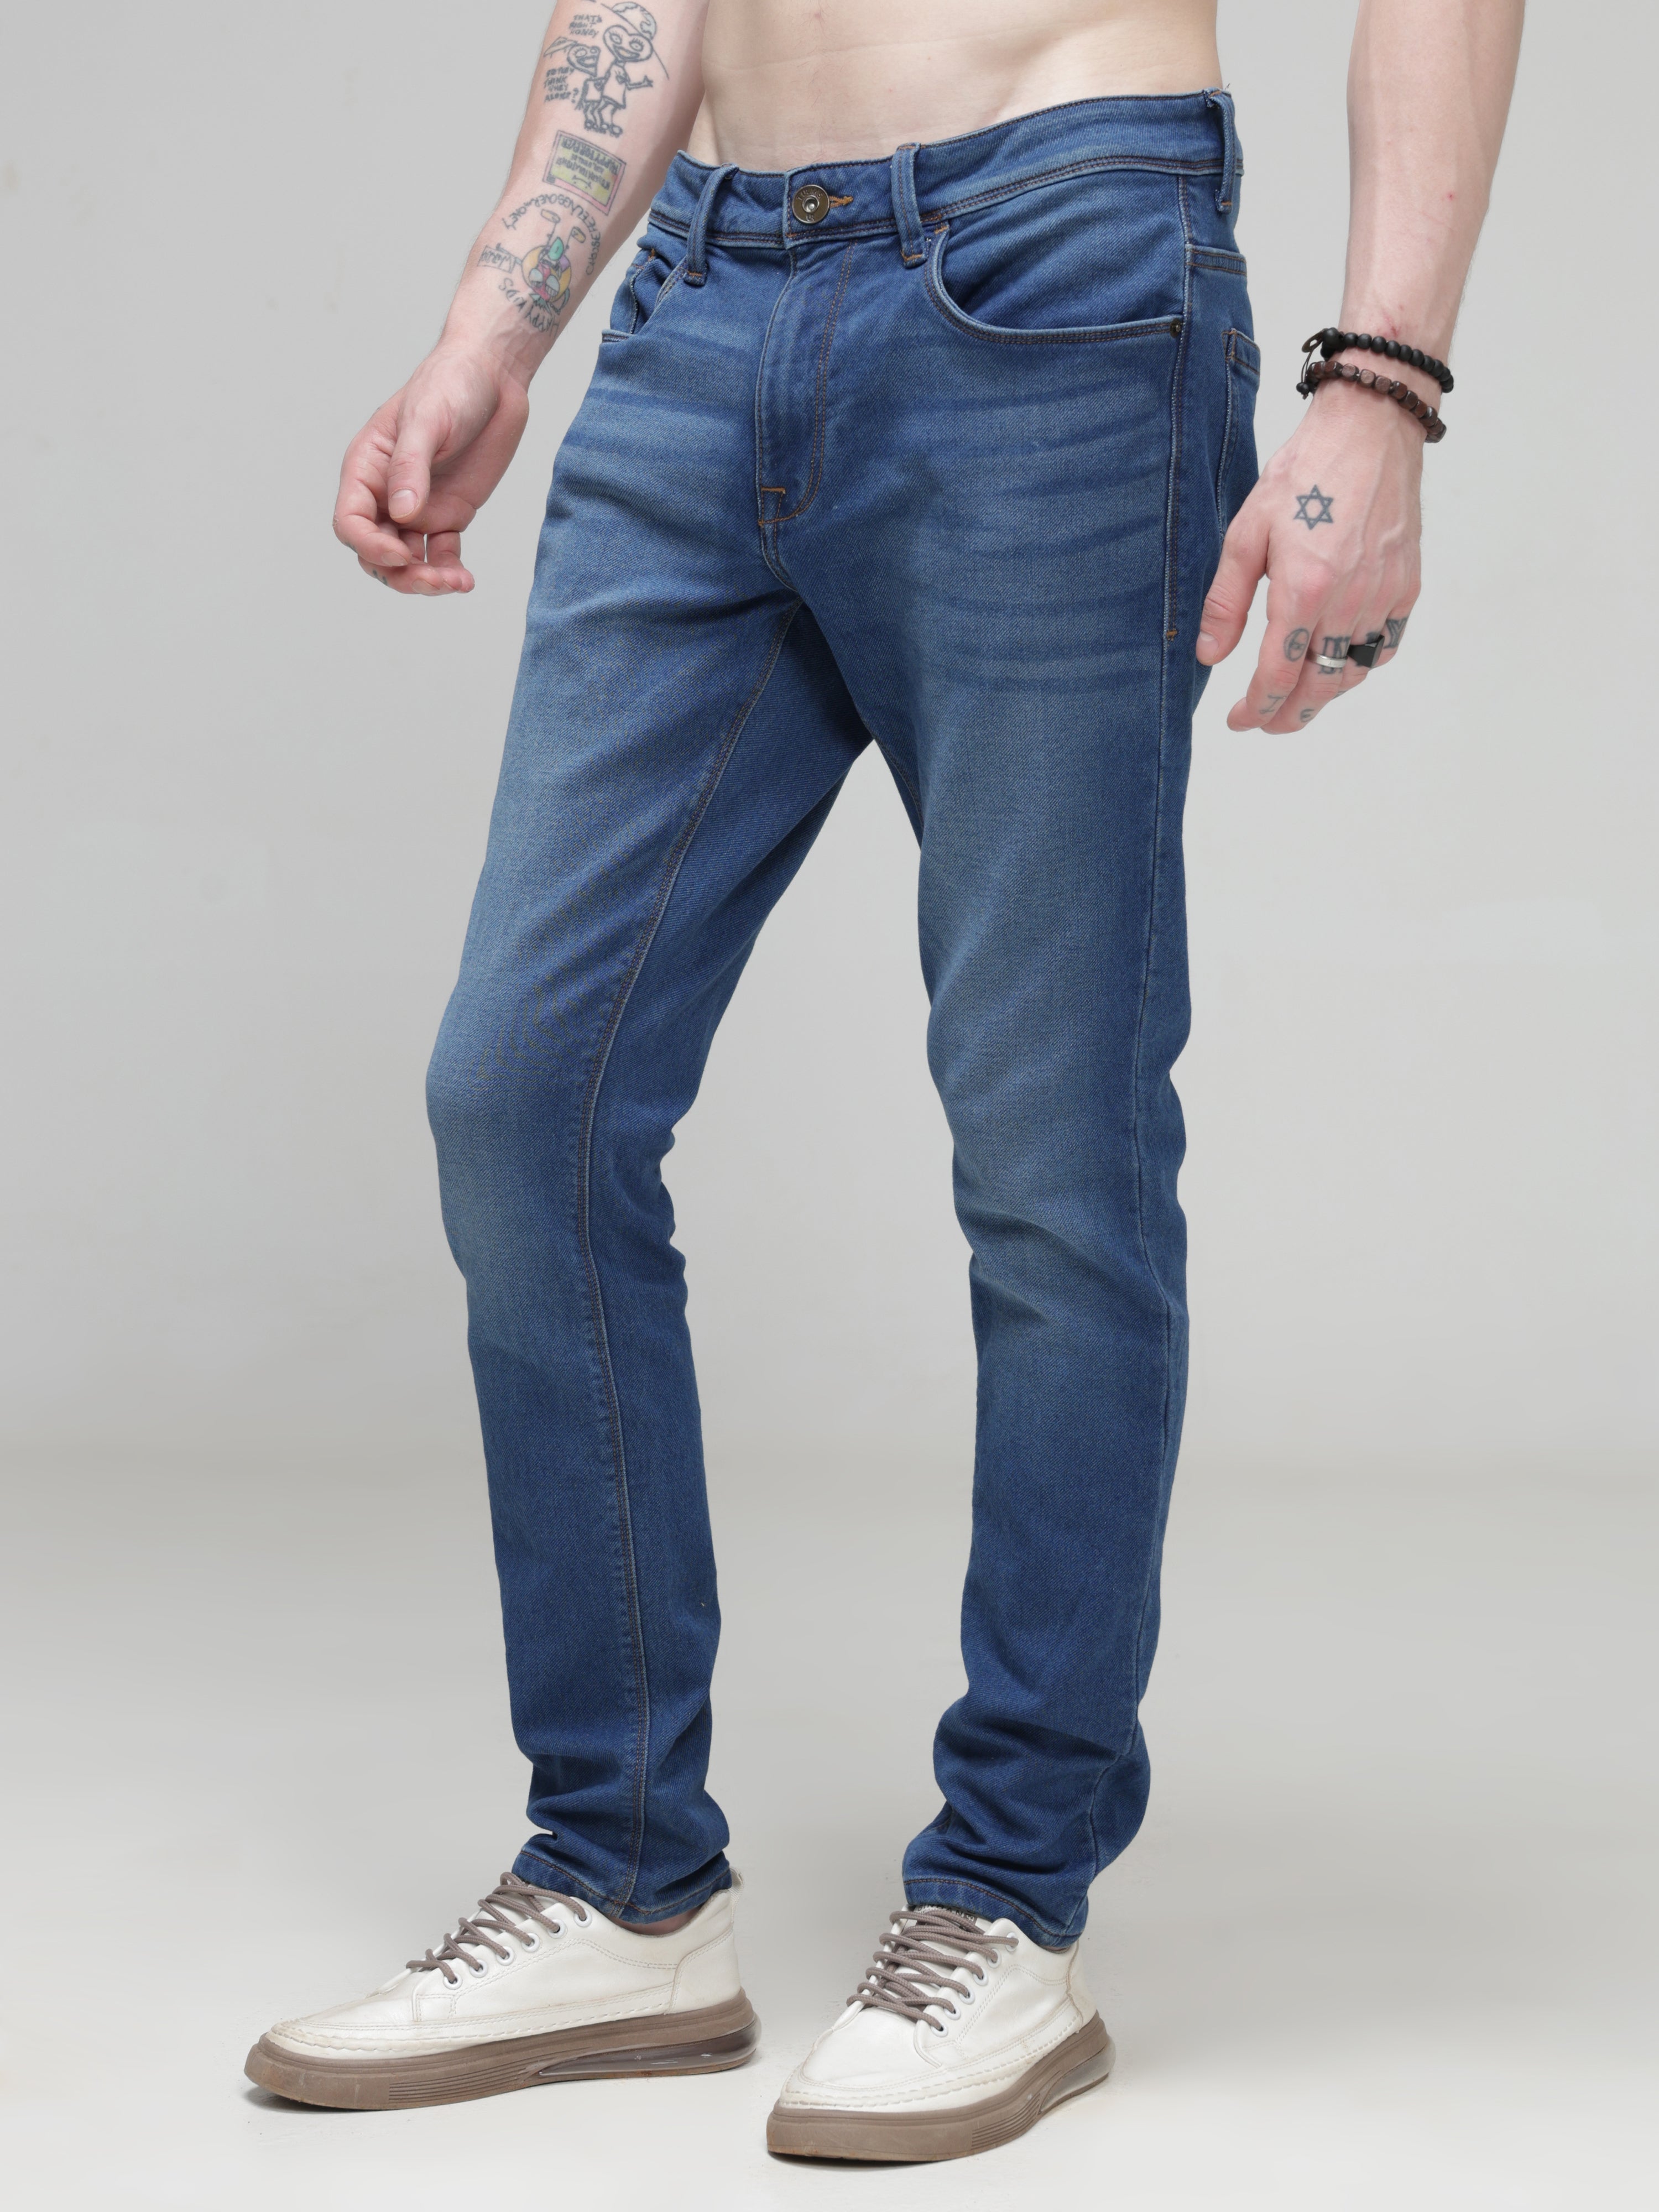 URturms Discover Turms 30 days no wash stain-repellent jeans for men. Perfect for travel and everyday wear. Anti-odour, anti-stain, no itching. Rs. 2999.00